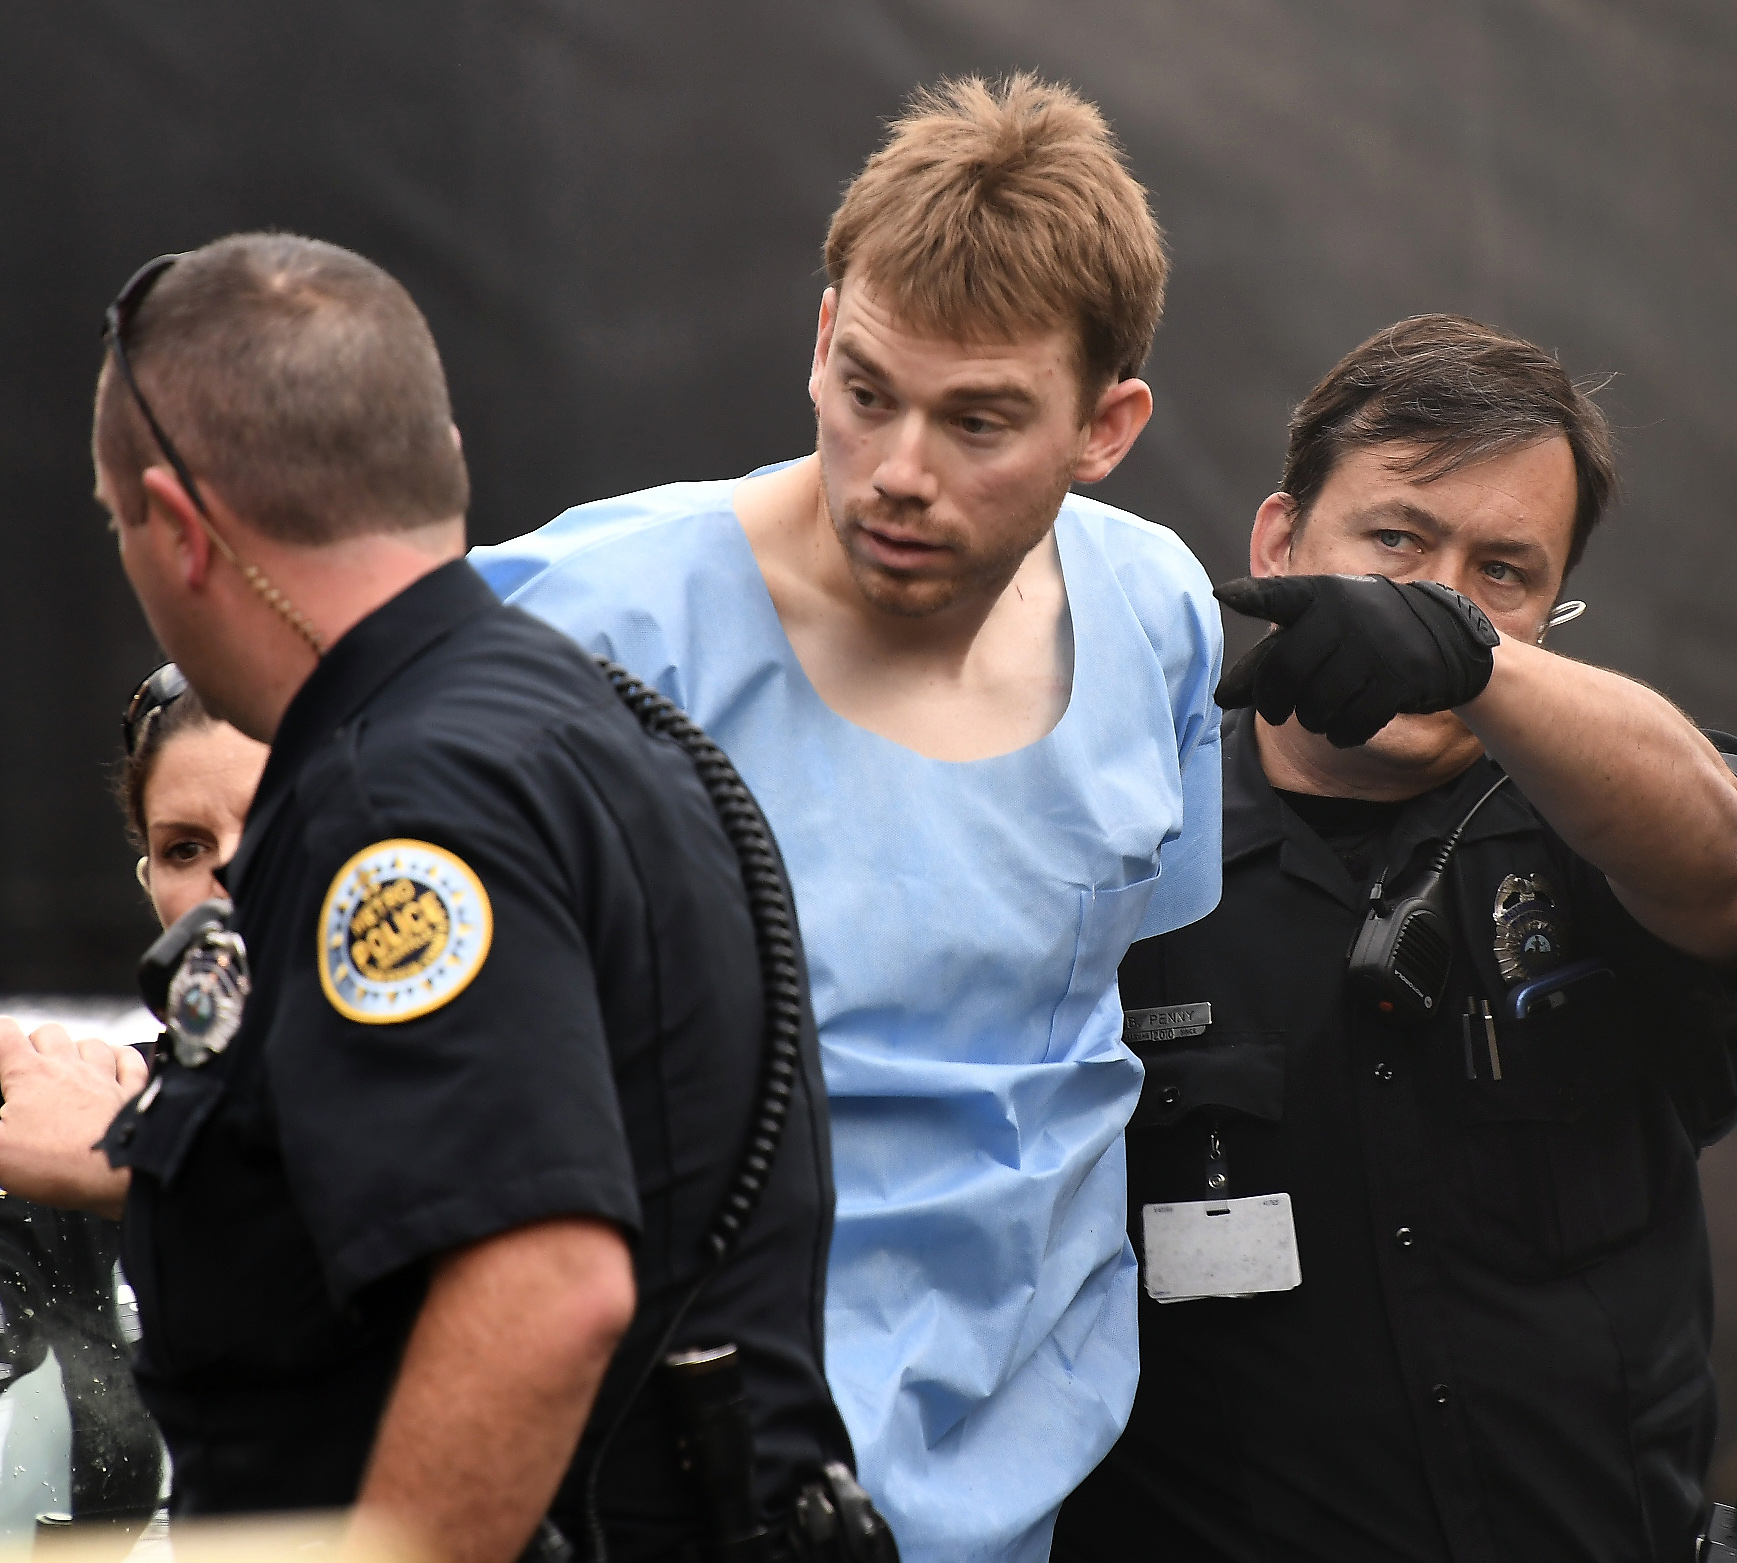 PHOTO: Law enforcement personnel escort accused Waffle House gunman Travis Reinking into booking at Hill Detention Center in Nashville, Tenn., April 23, 2018.